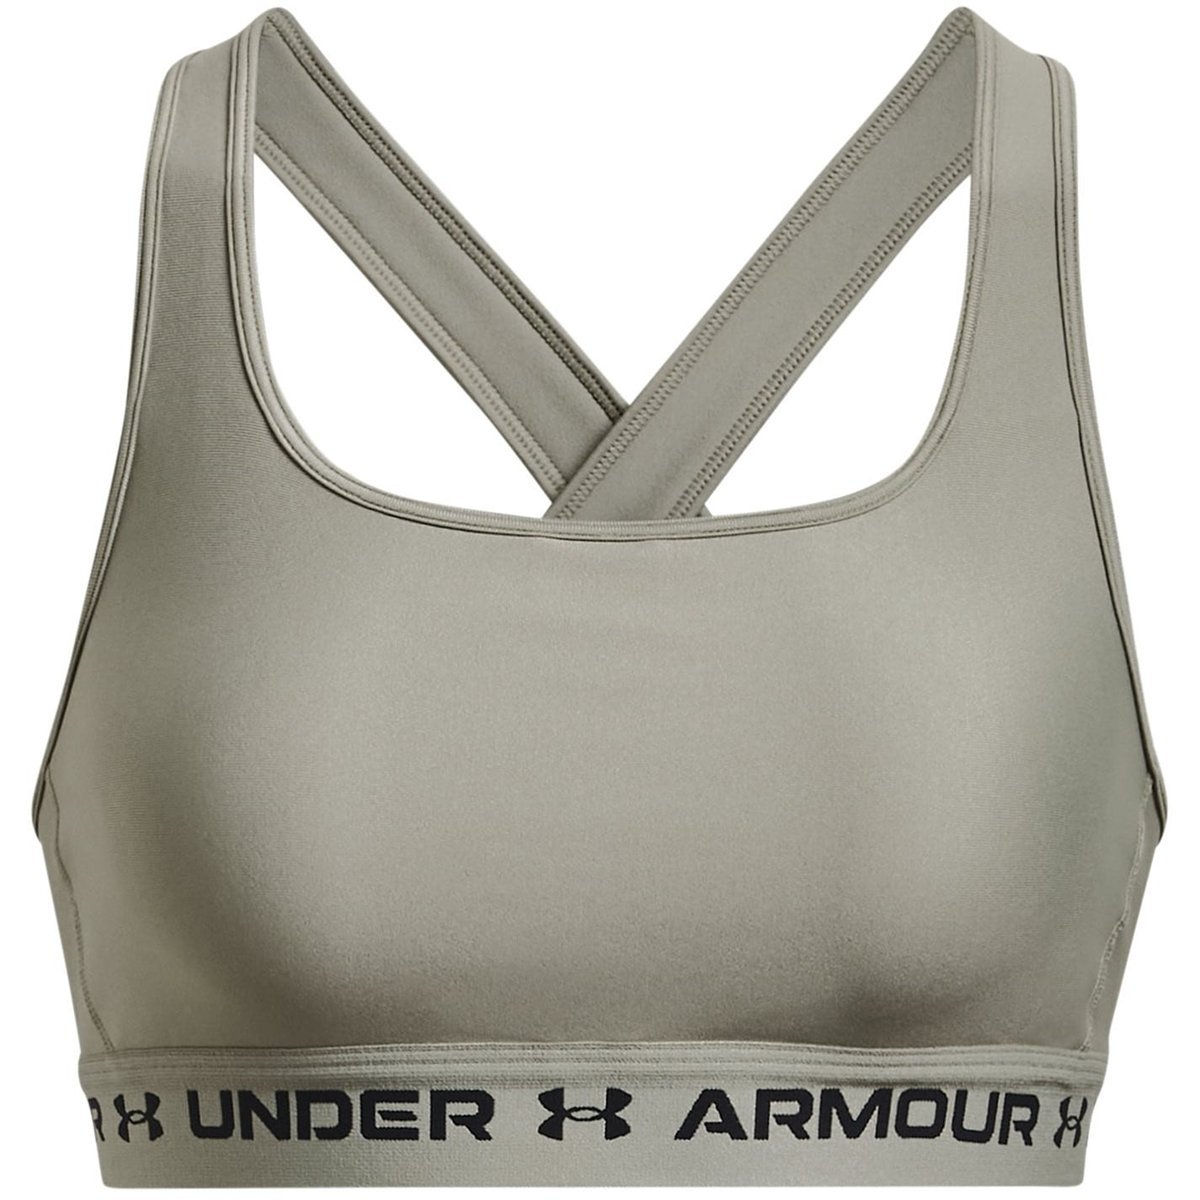  Under Armour Women's Armour Eclipse High Impact Sports Bra,  Black /Metallic Silver, 32A : Clothing, Shoes & Jewelry